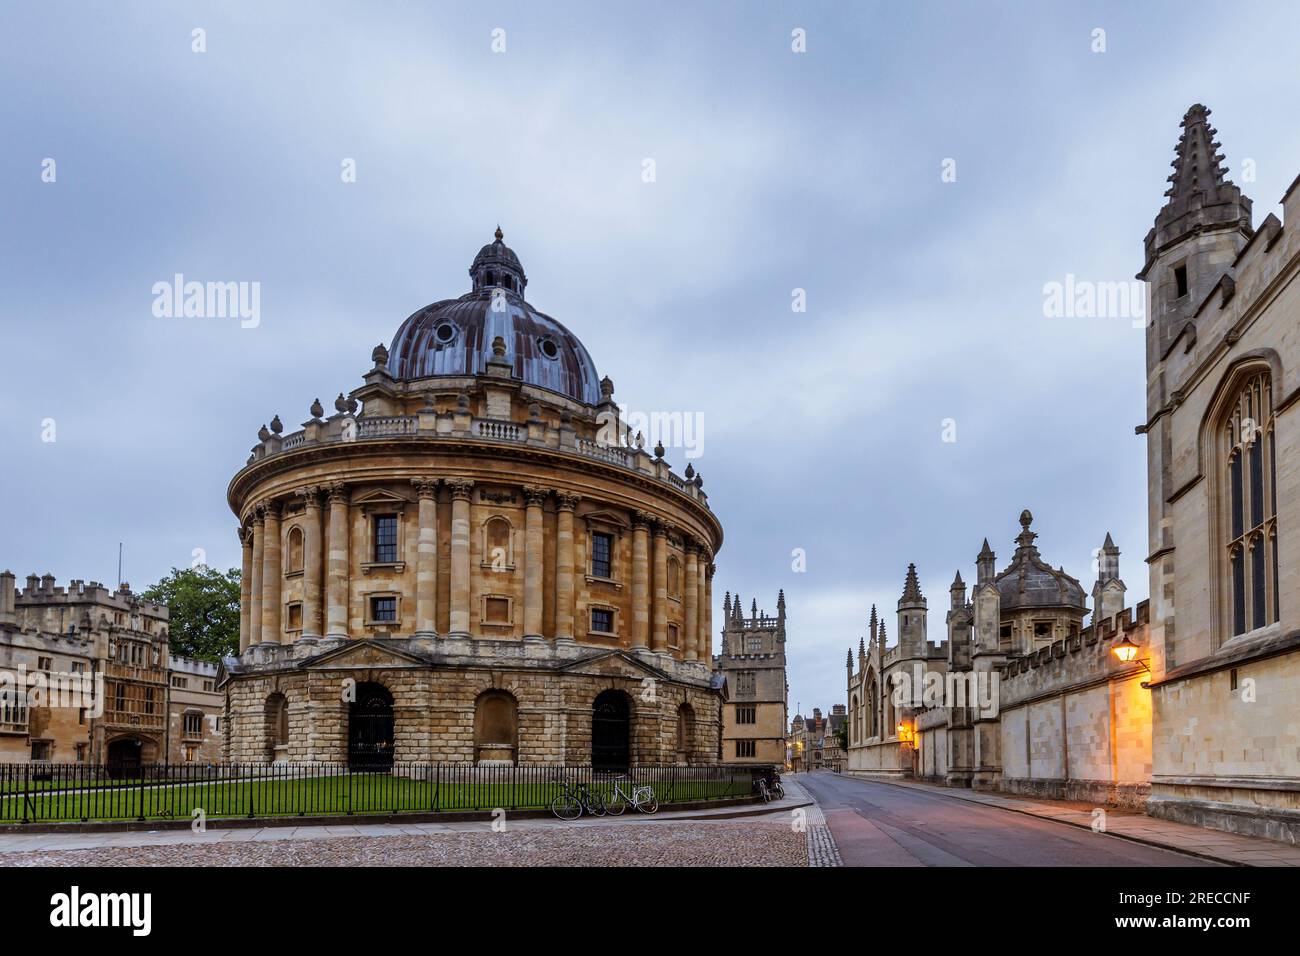 The Radcliffe Camera in Oxford with no people, early in the morning on a cloudy day. Stock Photo